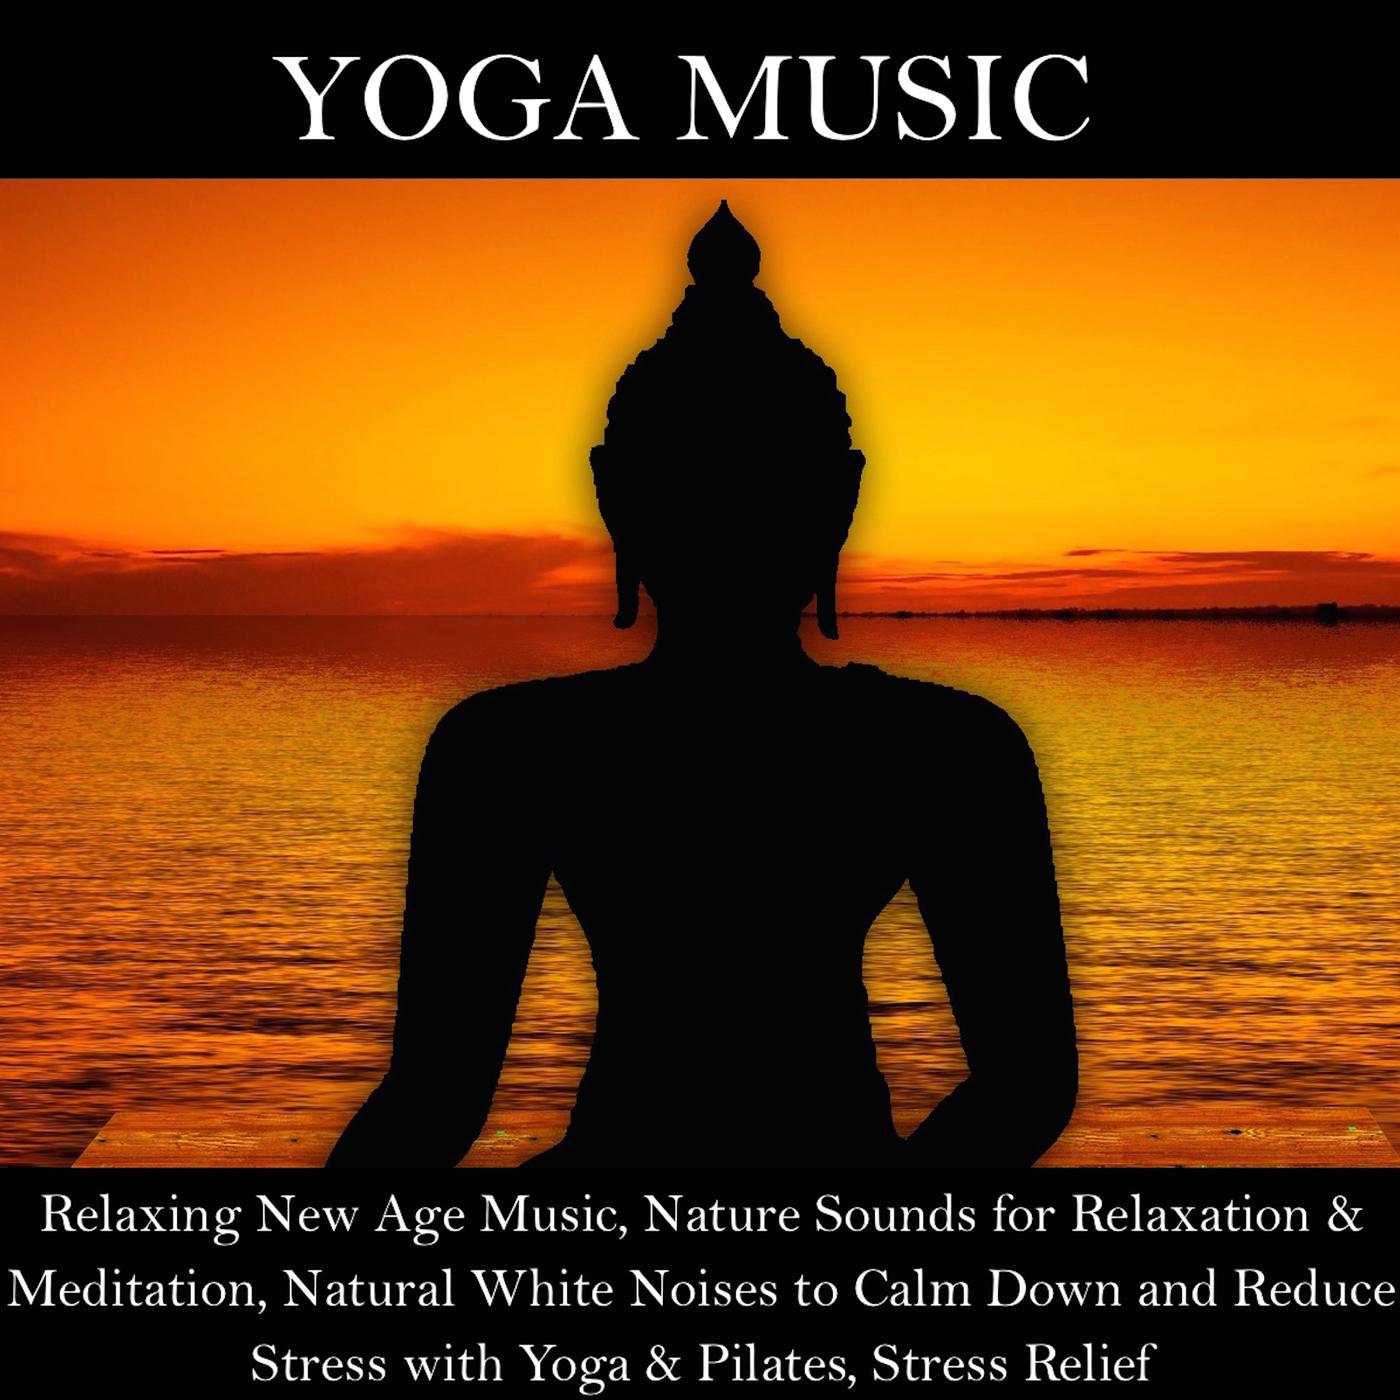 Yoga Music - Relaxing New Age Music, Nature Sounds for Relaxation & Meditation, Natural White Noises to Calm Down and Reduce Stress with Yoga & Pilates, Stress Relief